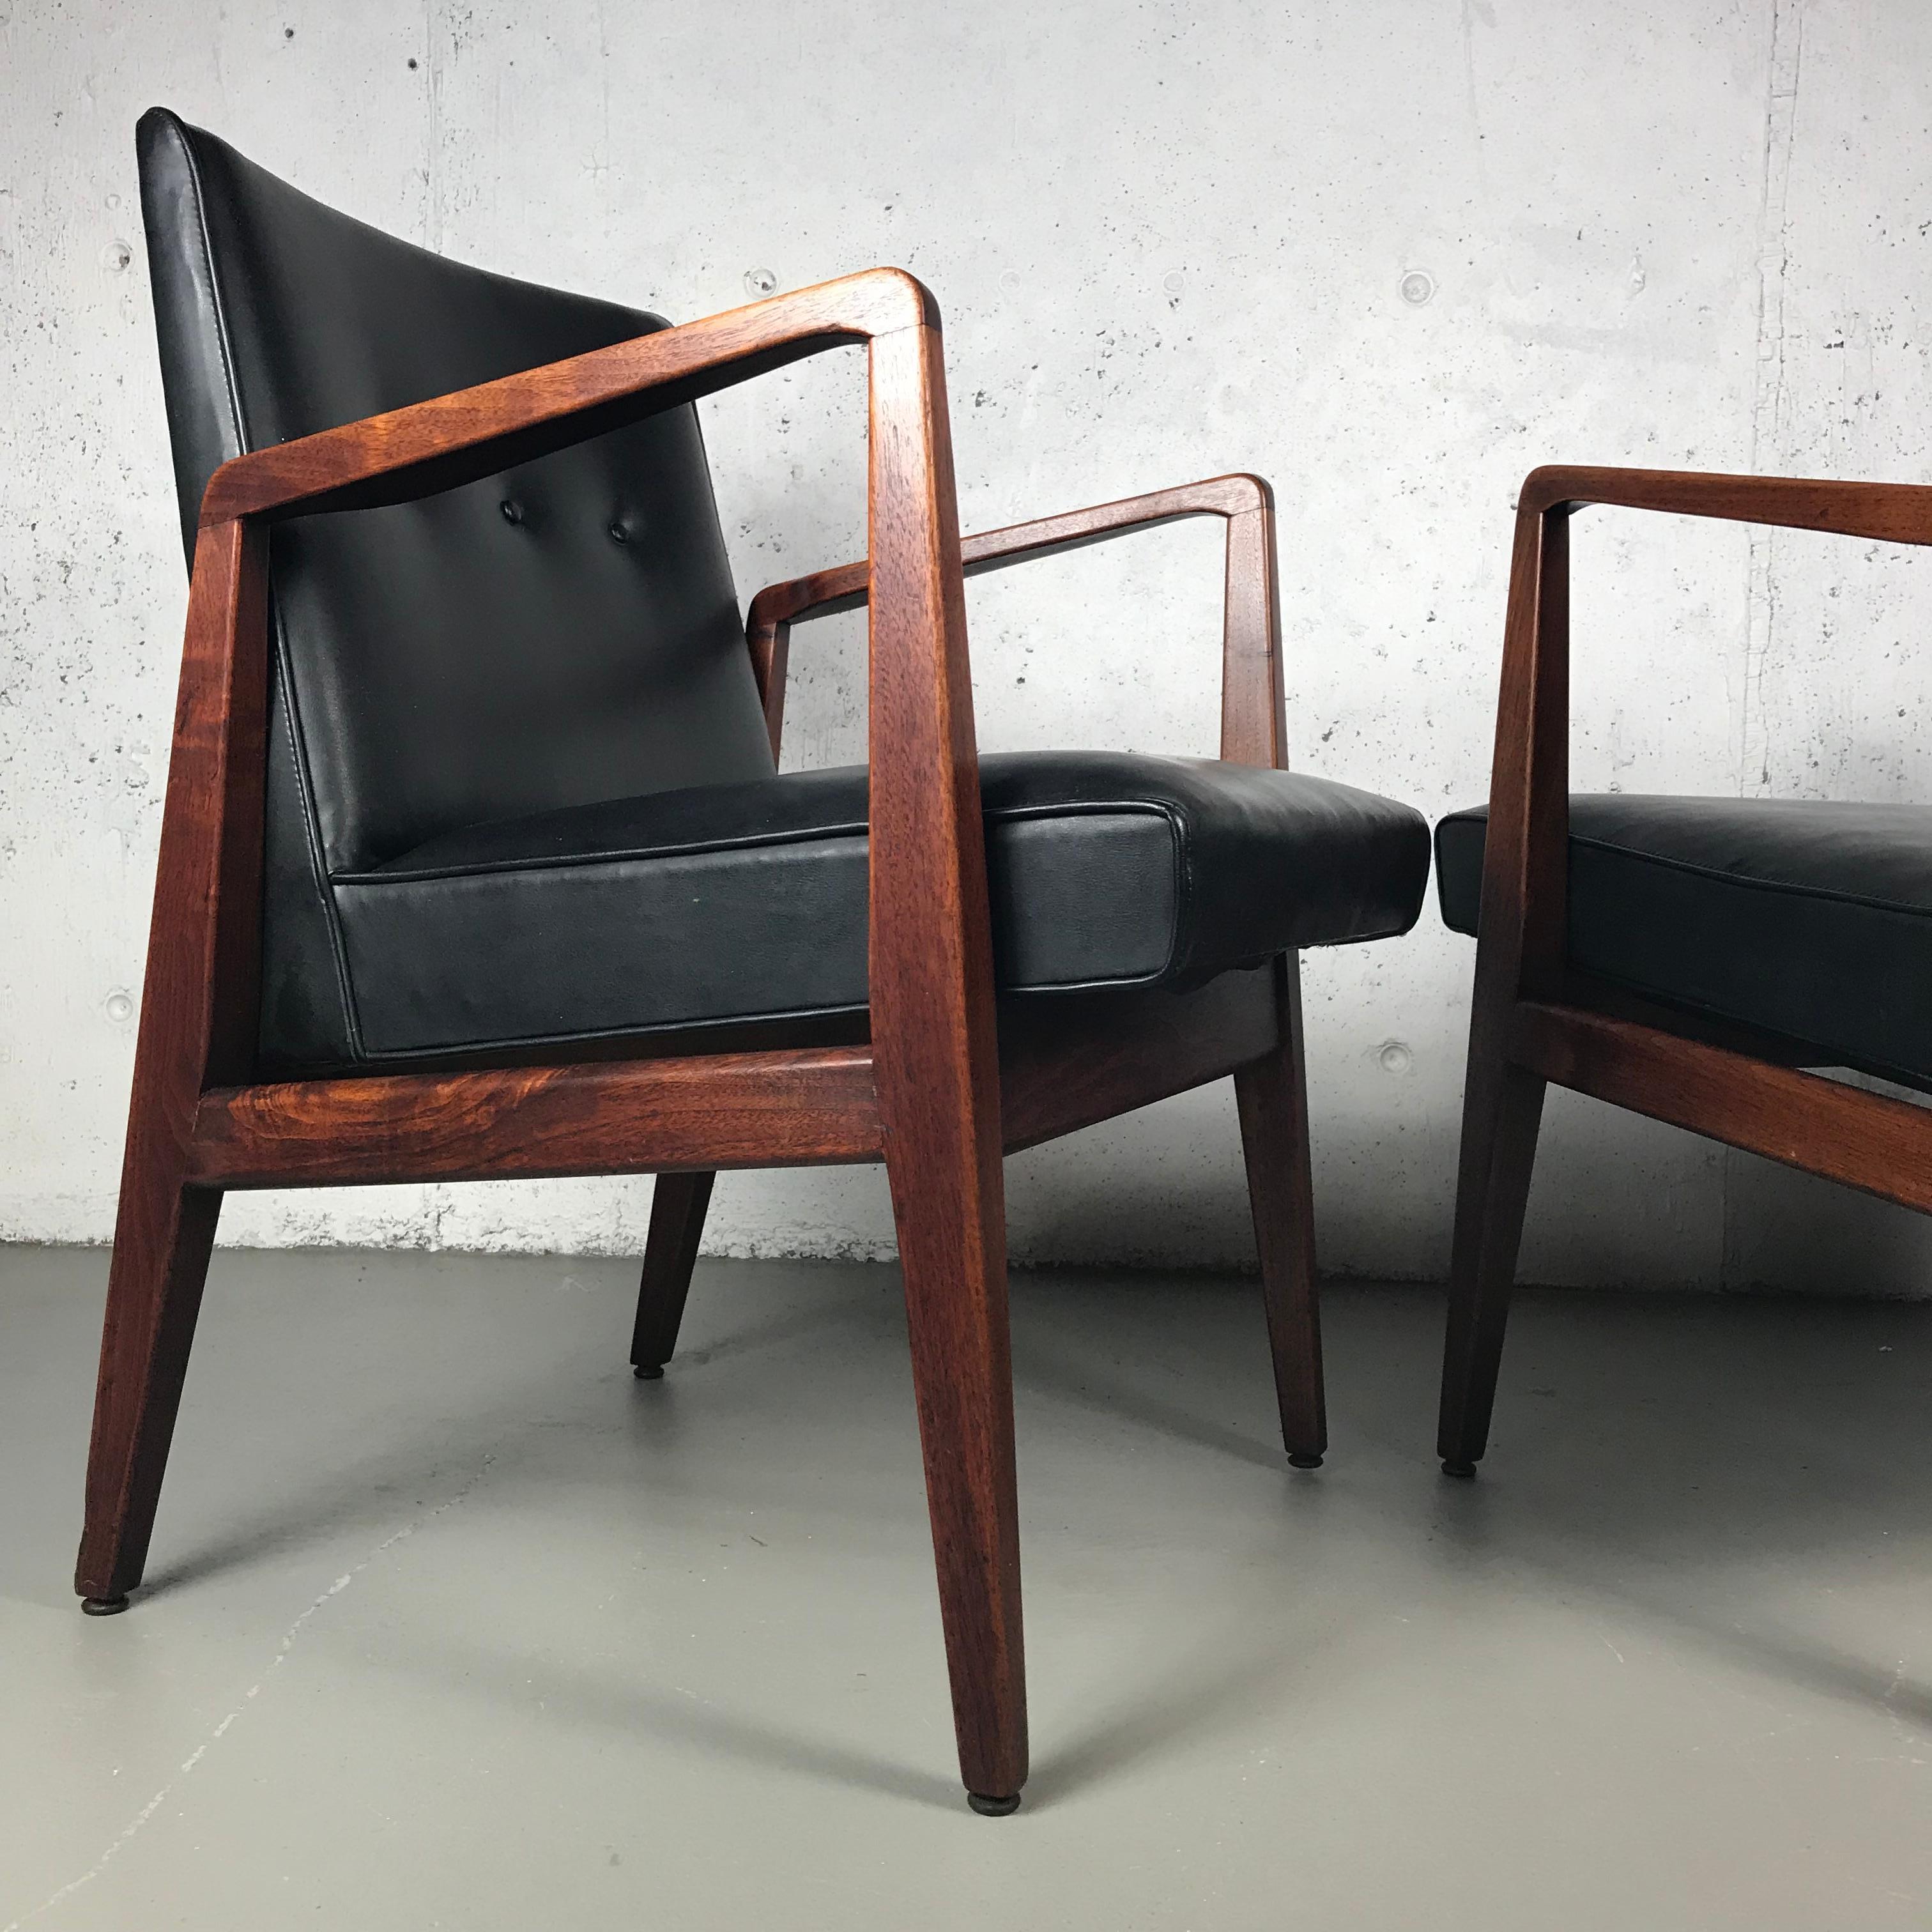 Beautiful pair of occasional or lounge chairs in walnut and black vinyl designed by Jens Risom for Jens Risom Designs. These chairs are in original condition and the walnut has wonderful dark swirling grain. These chairs have patina that present